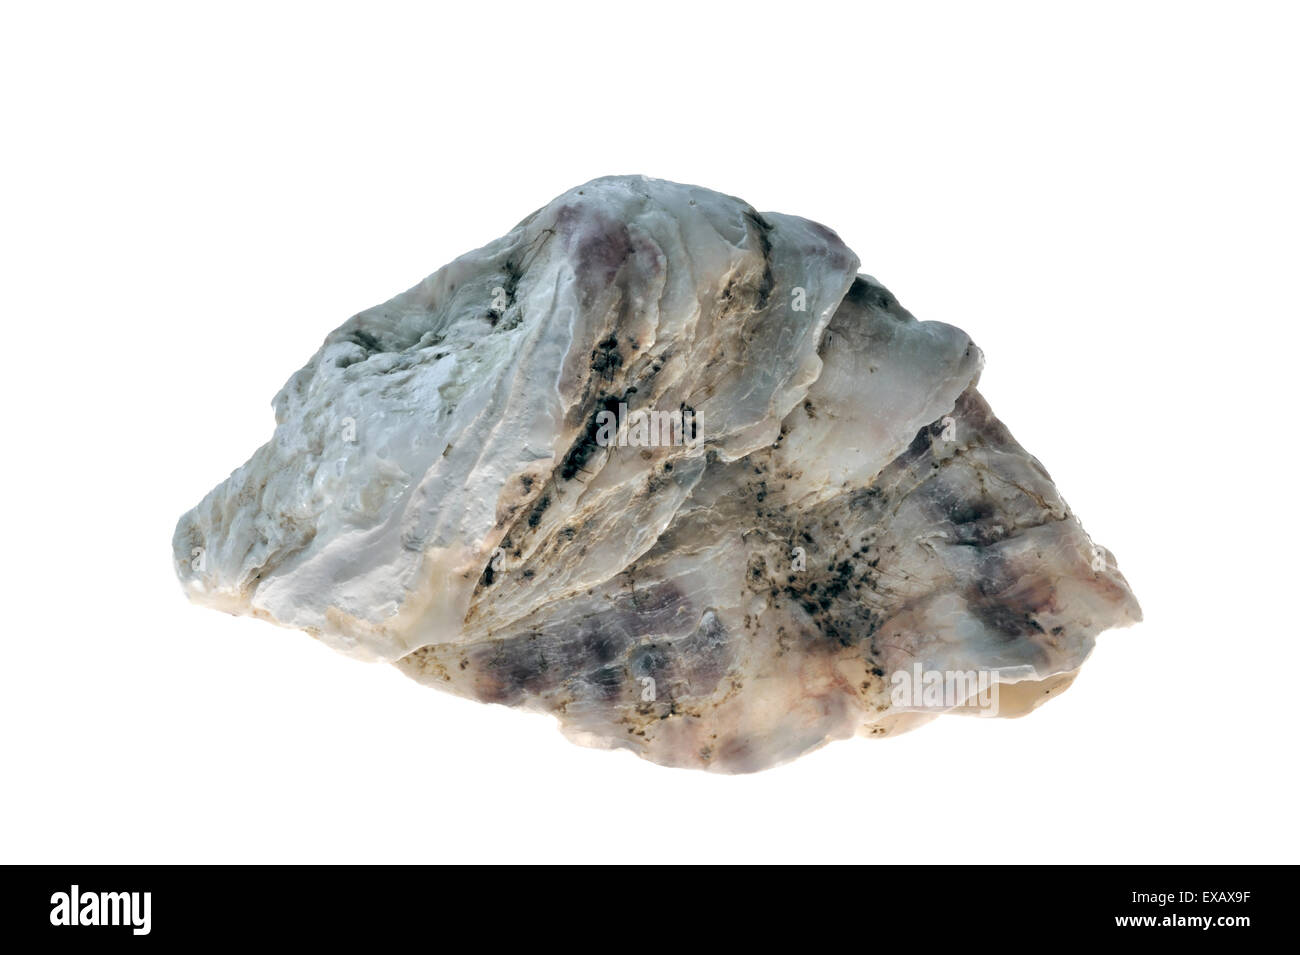 Pacific oyster / Japanese oyster / Miyagi oyster (Crassostrea gigas) native to the Pacific coast of Asia on white background Stock Photo